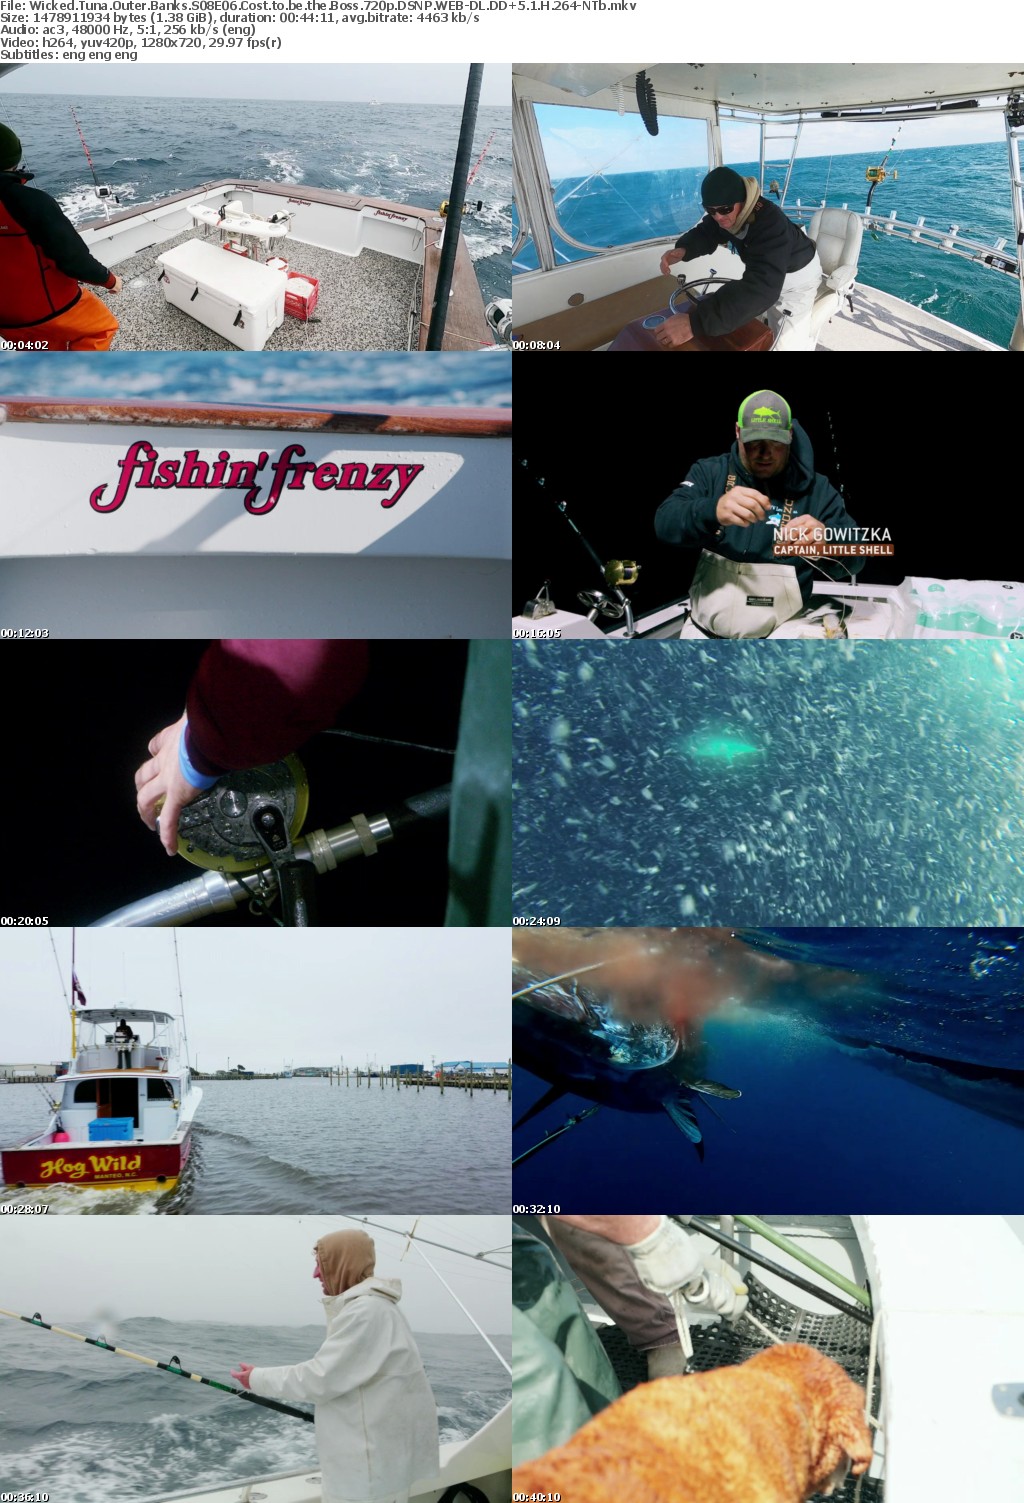 Wicked Tuna Outer Banks S08E06 Cost to be the Boss 720p DSNP WEBRip DDP5 1 x264-NTb